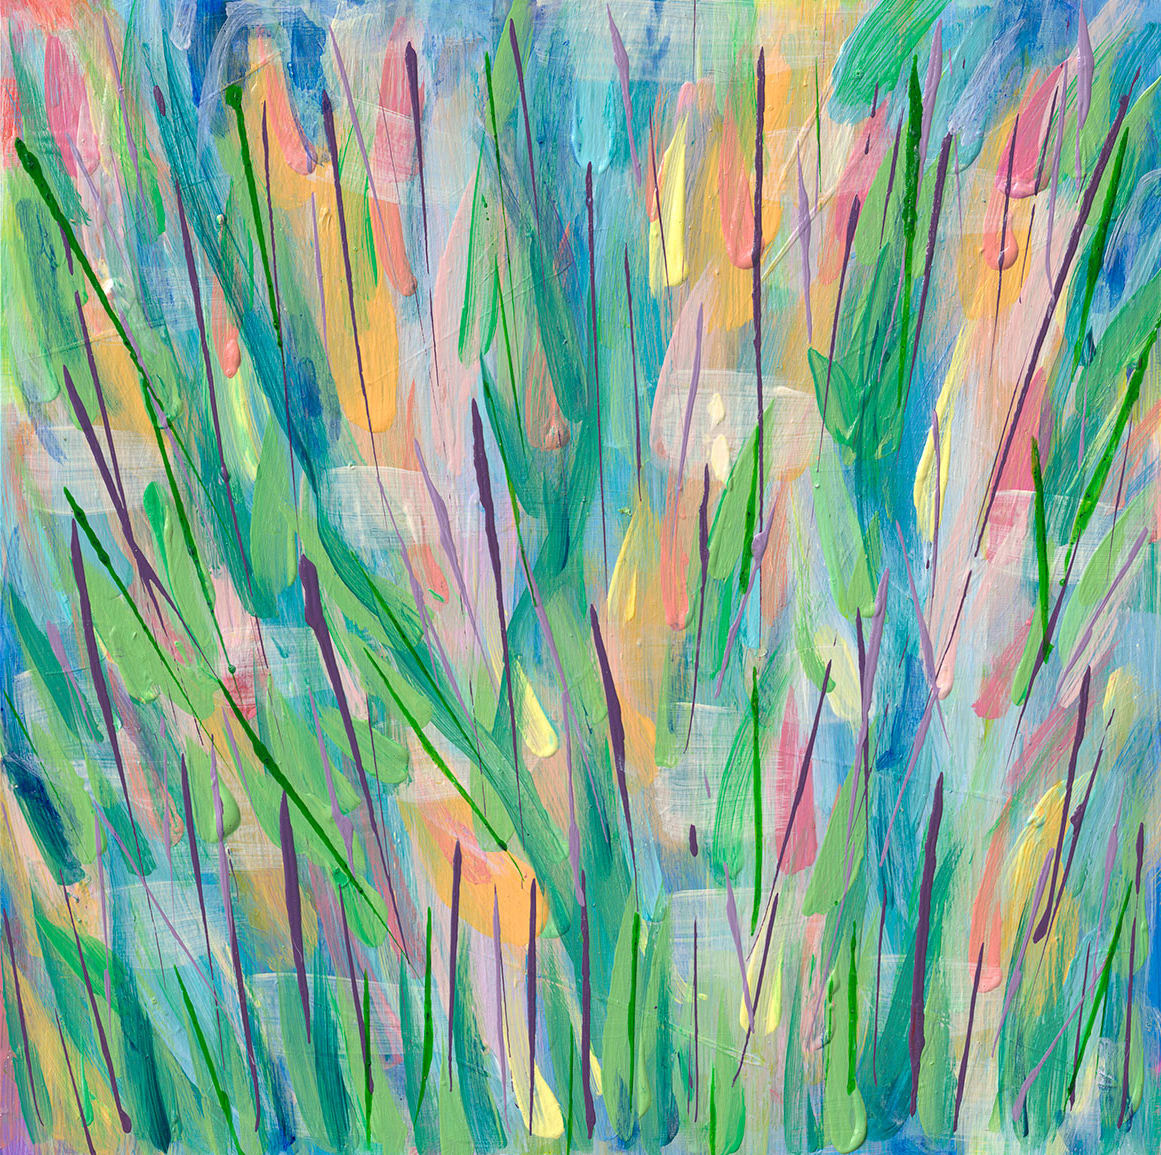 Green Grass Square 1, 2019, acrylic on canvas, 12 x 12 inches by Rachael Grad  Image: Green Grass Square 1, 2019, acrylic on canvas, 12 x 12 inches